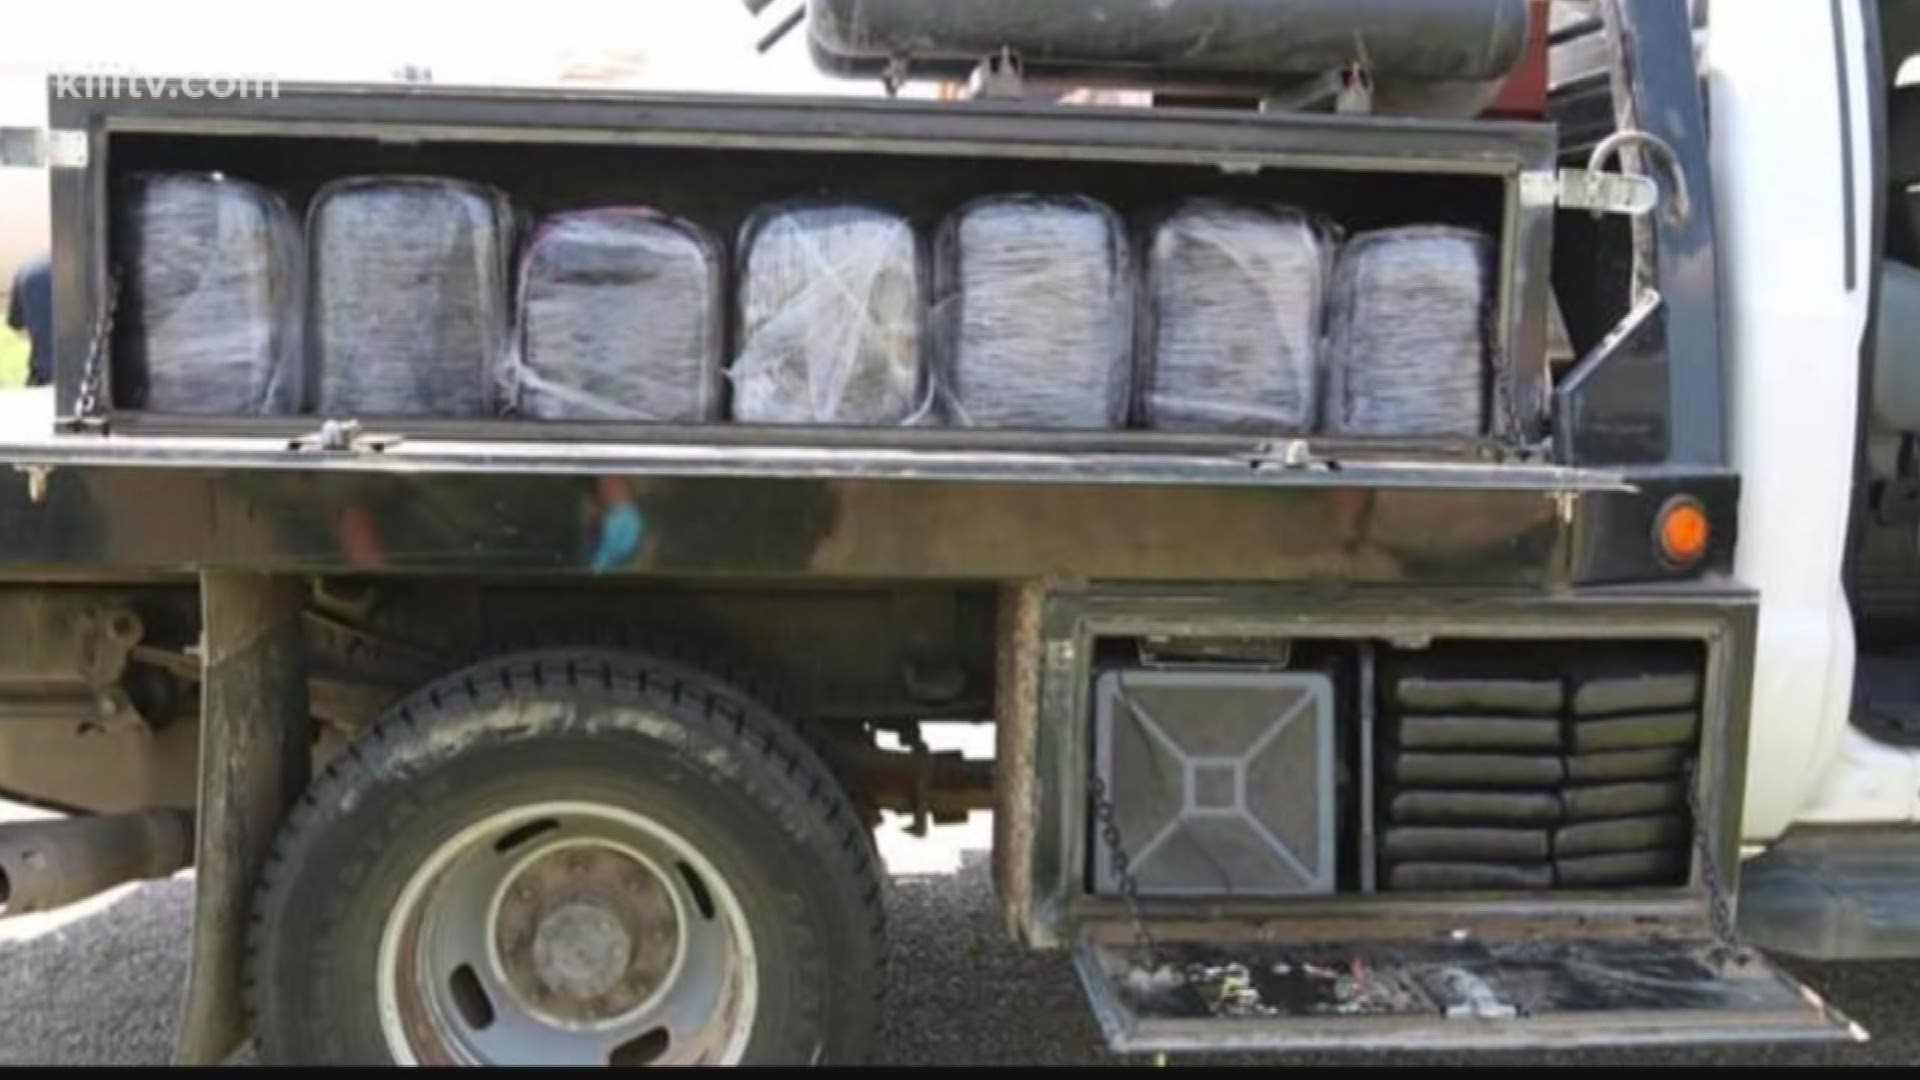 On Friday morning agents seized 754 pounds of marijuana after they responded to suspicious activity on the ranch.